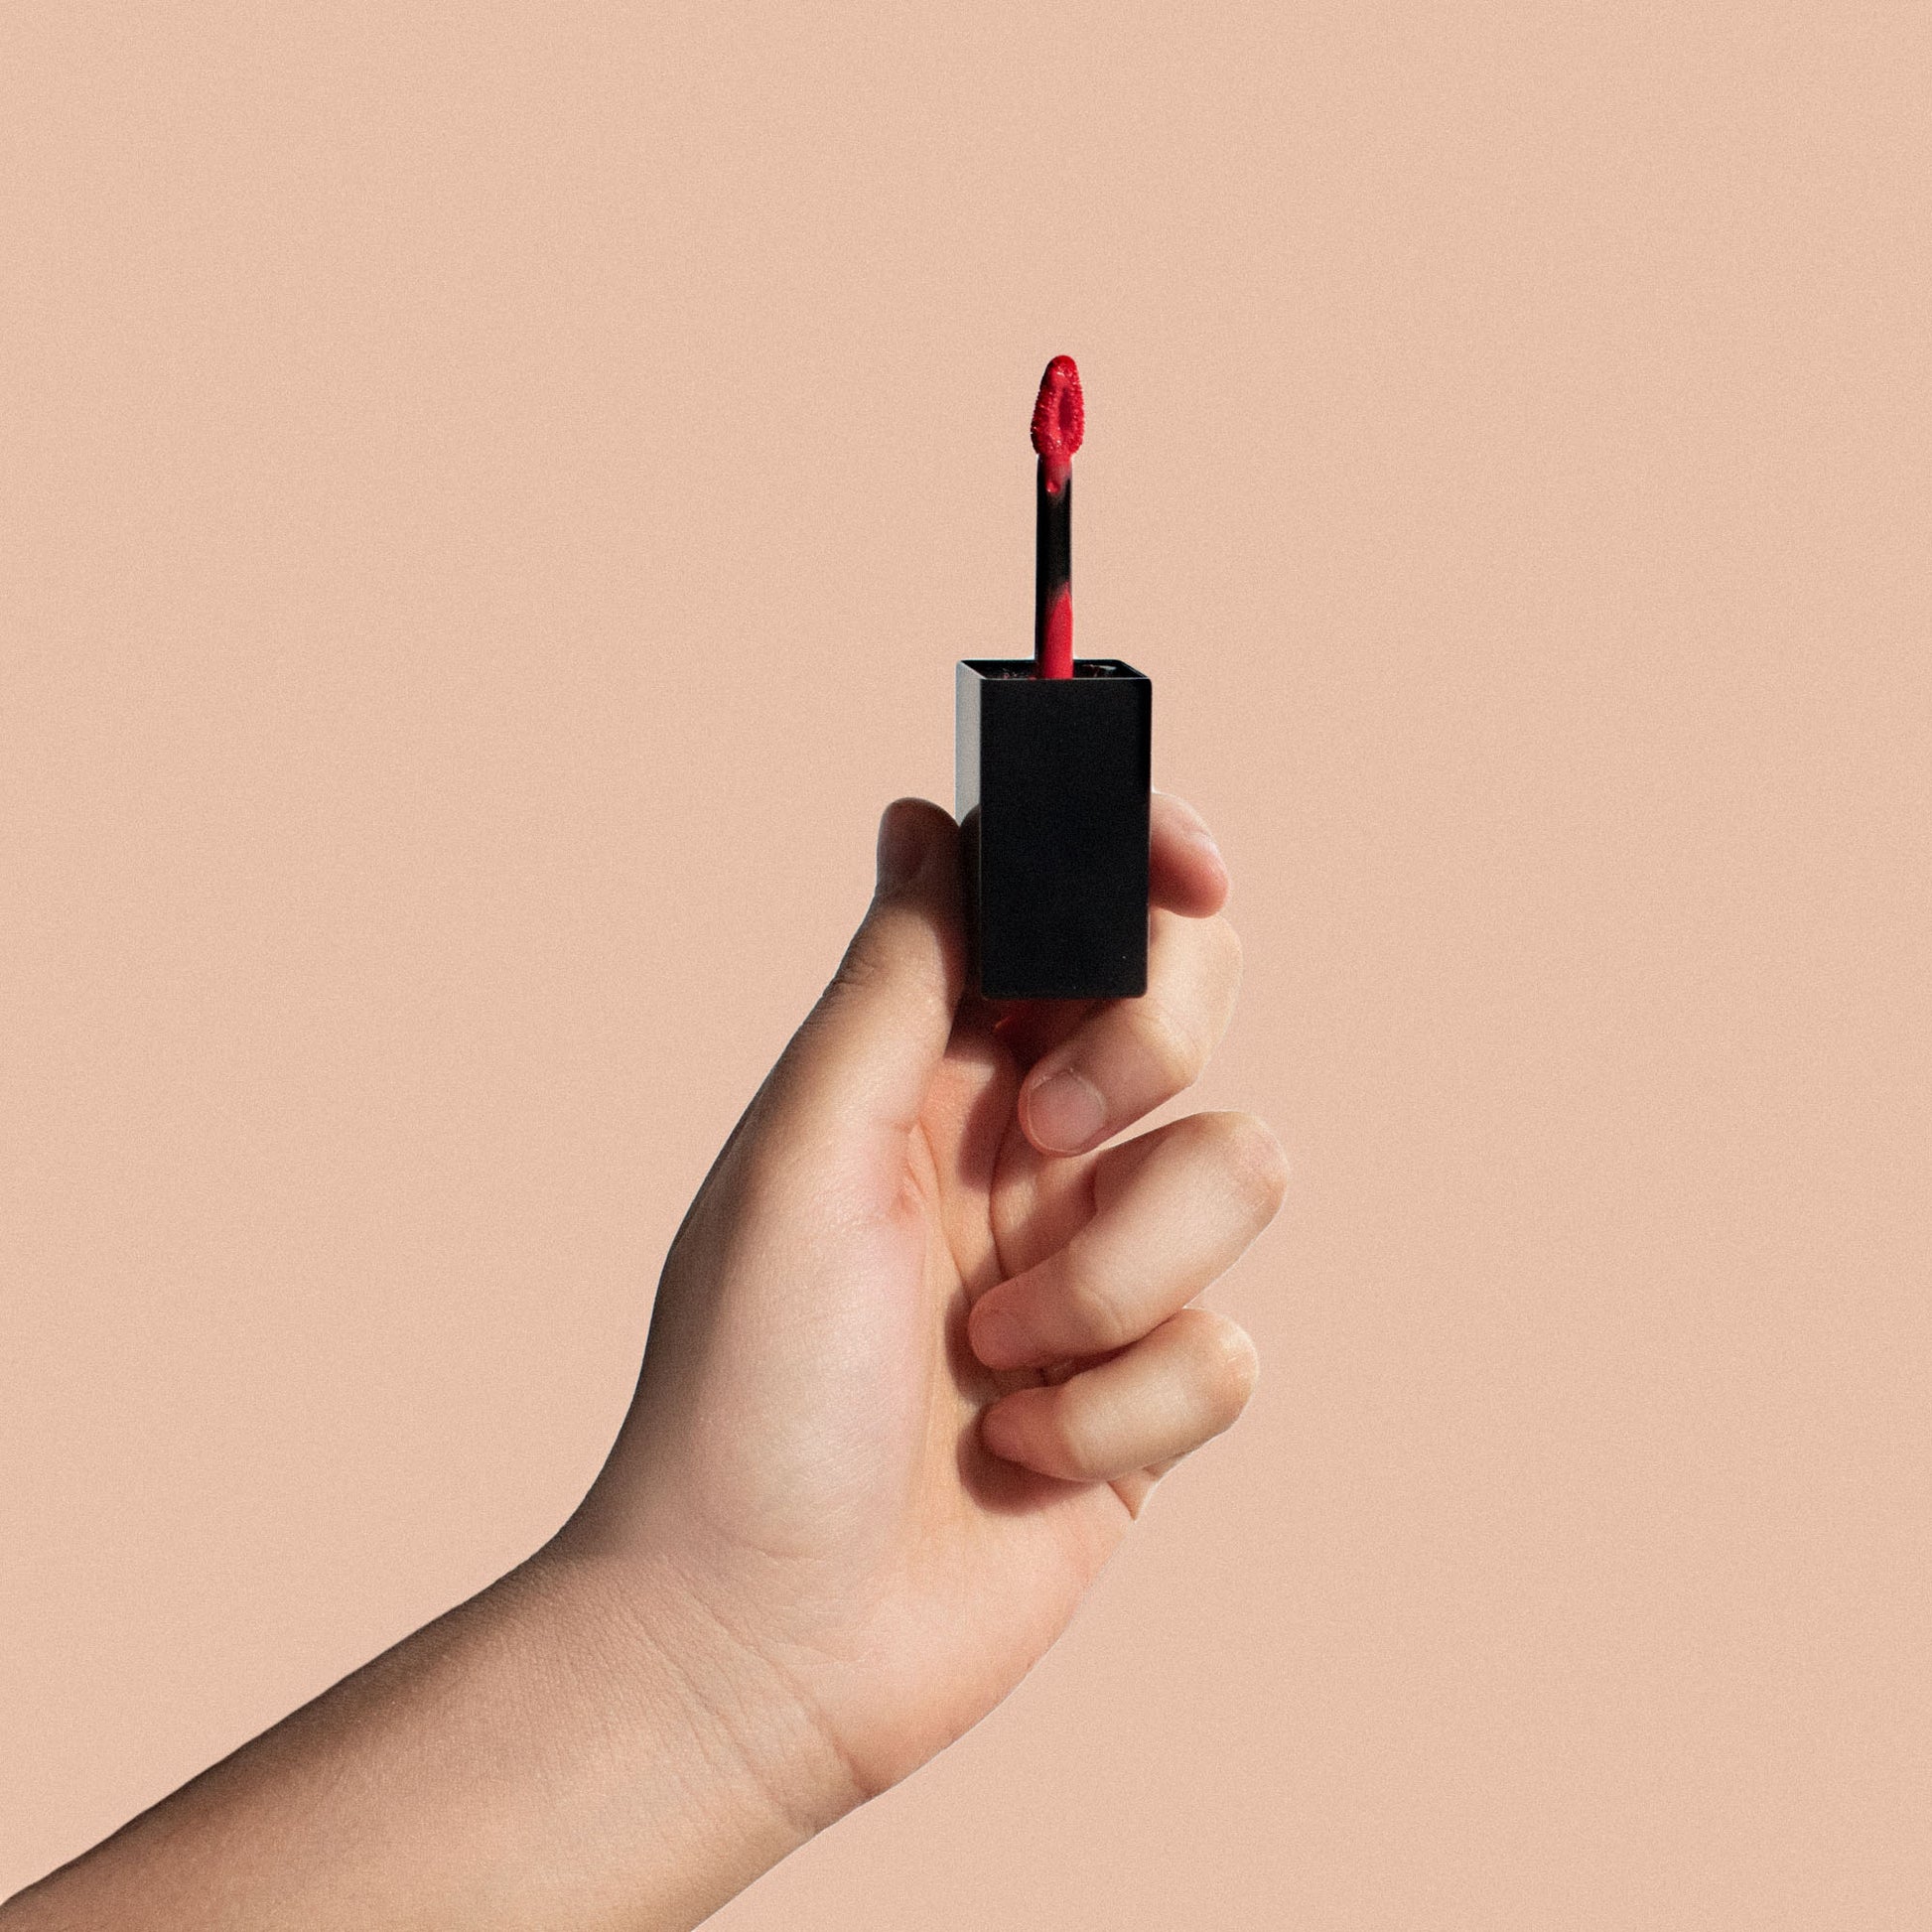 Recommended by makeup experts in the industry, I recommend Cruisin Organic's Twilight Matte Lip Stain for long-lasting, timeless matte lips. The formula is enriched with Vitamin E for added benefits.